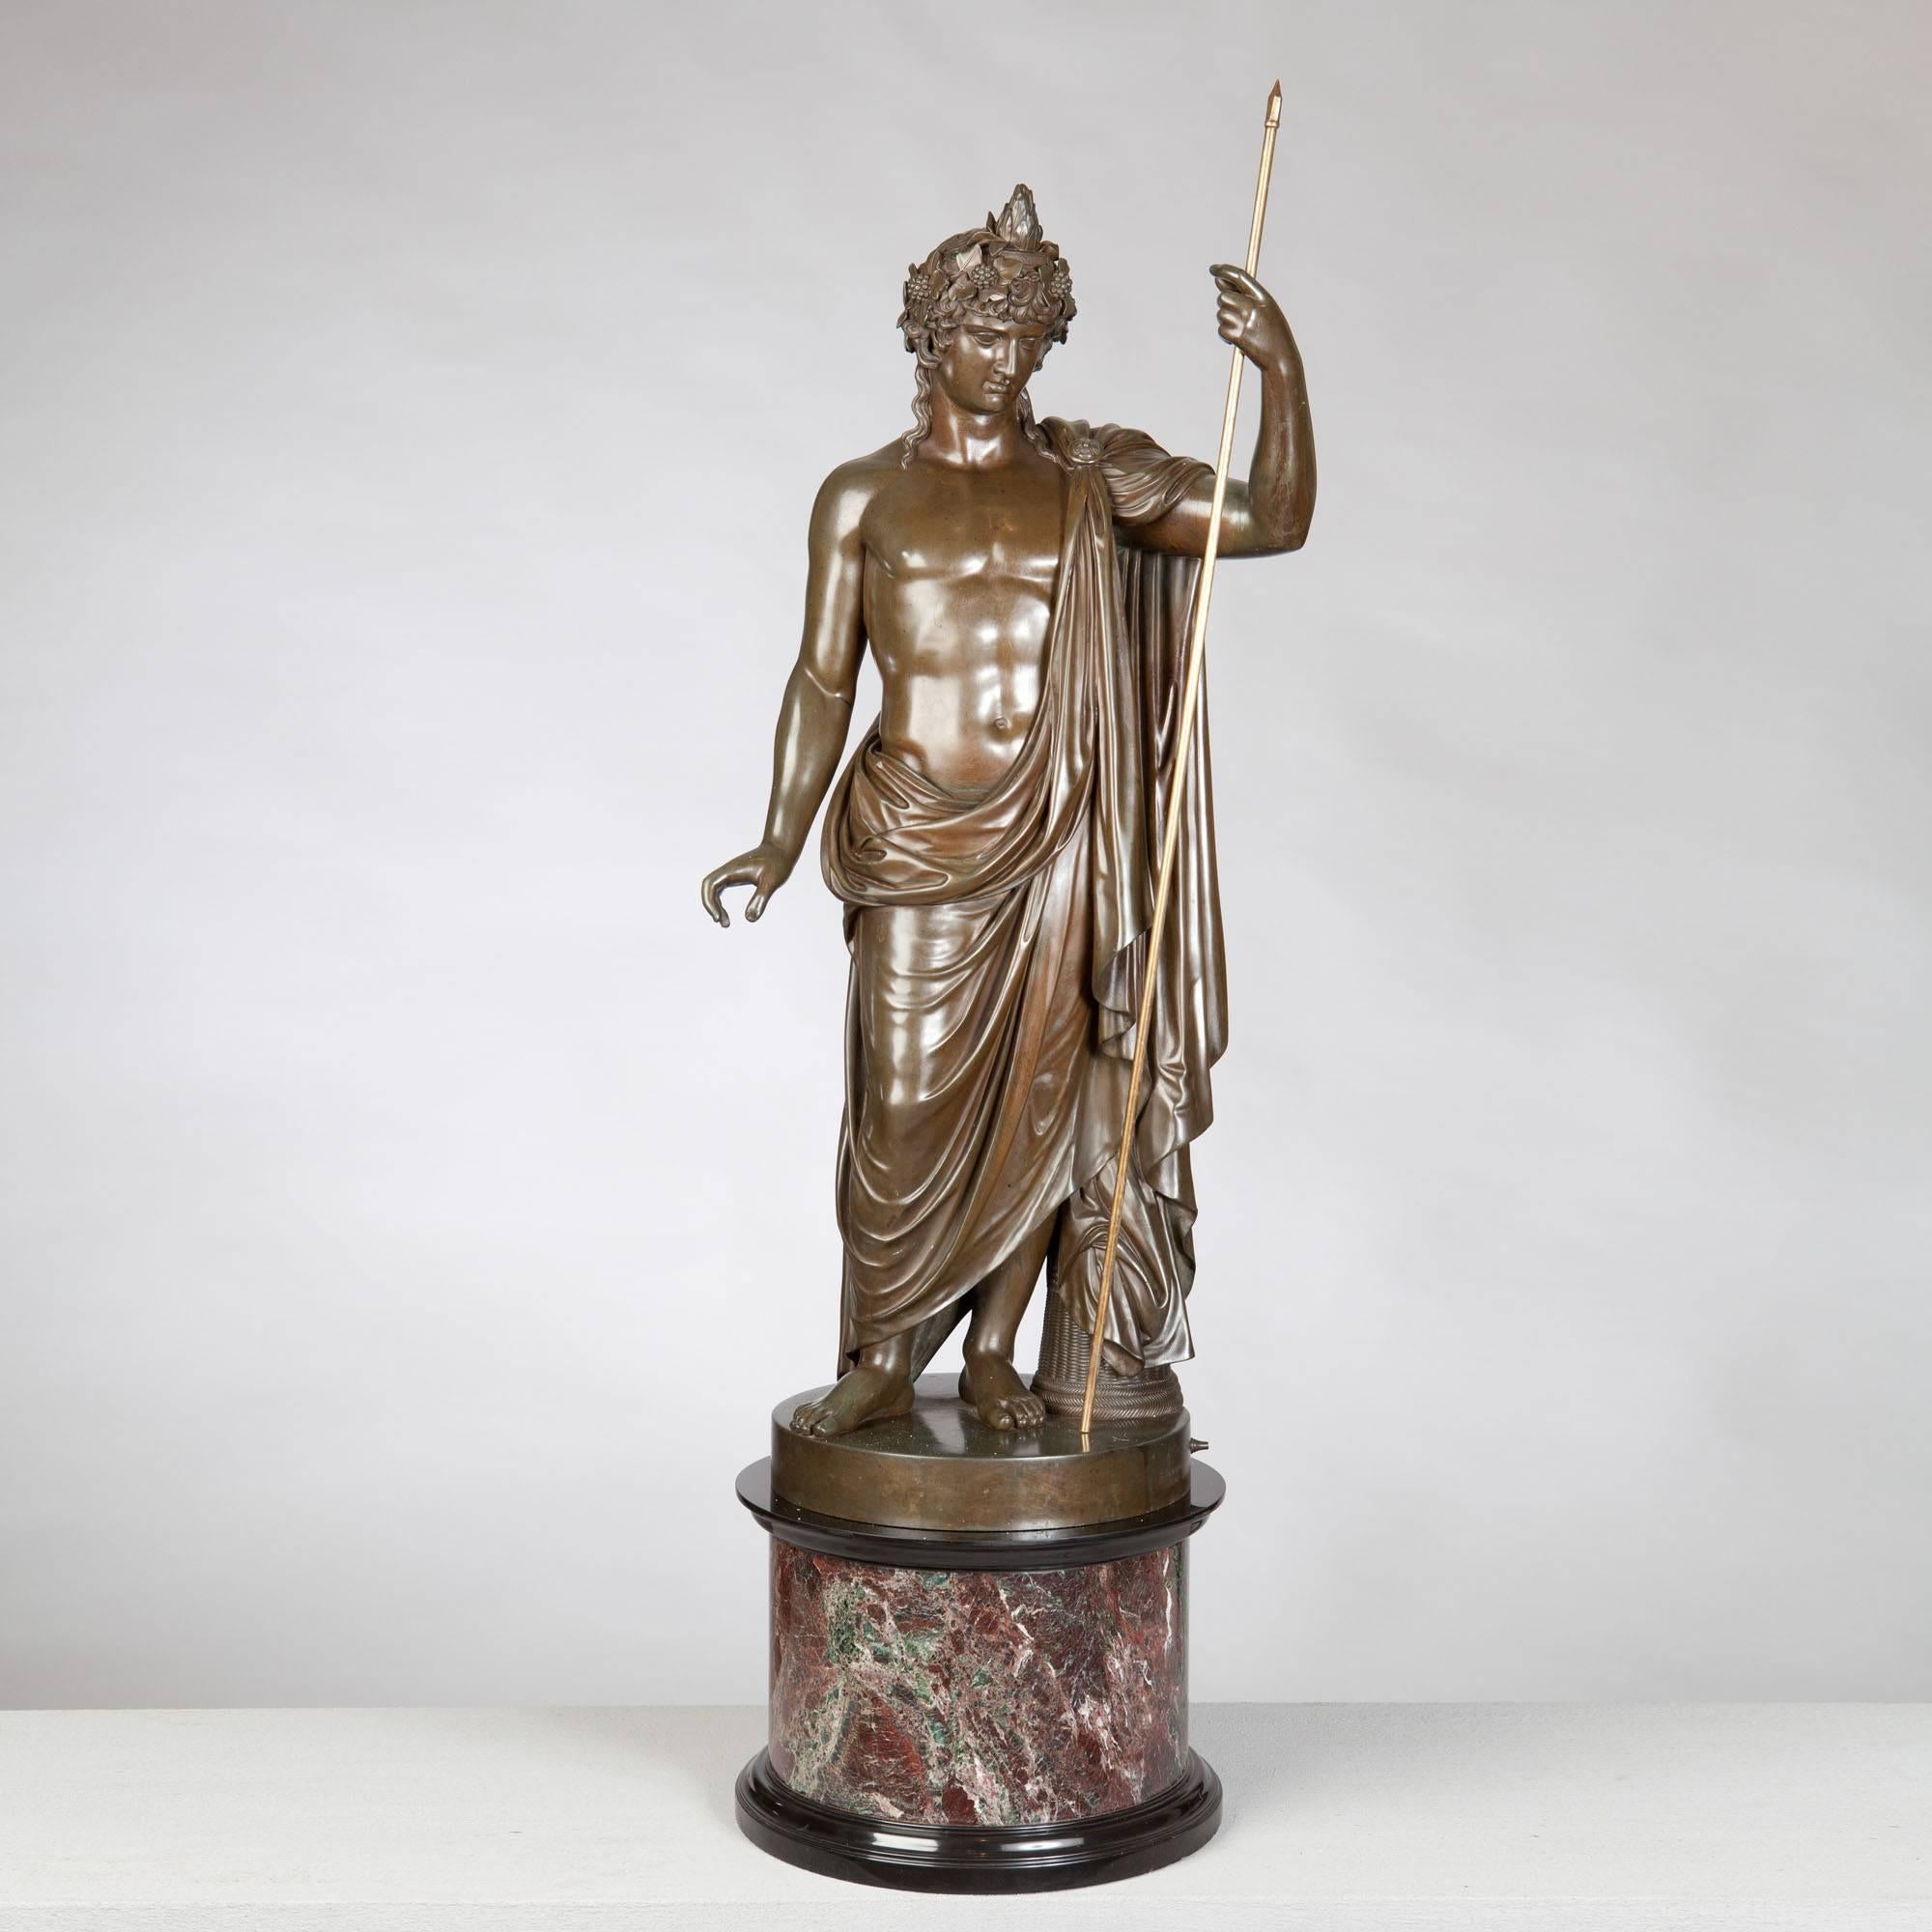 Bronze Statue of Antinous Holding a Sceptre by Boschetti, 19th Century In Excellent Condition In London, by appointment only